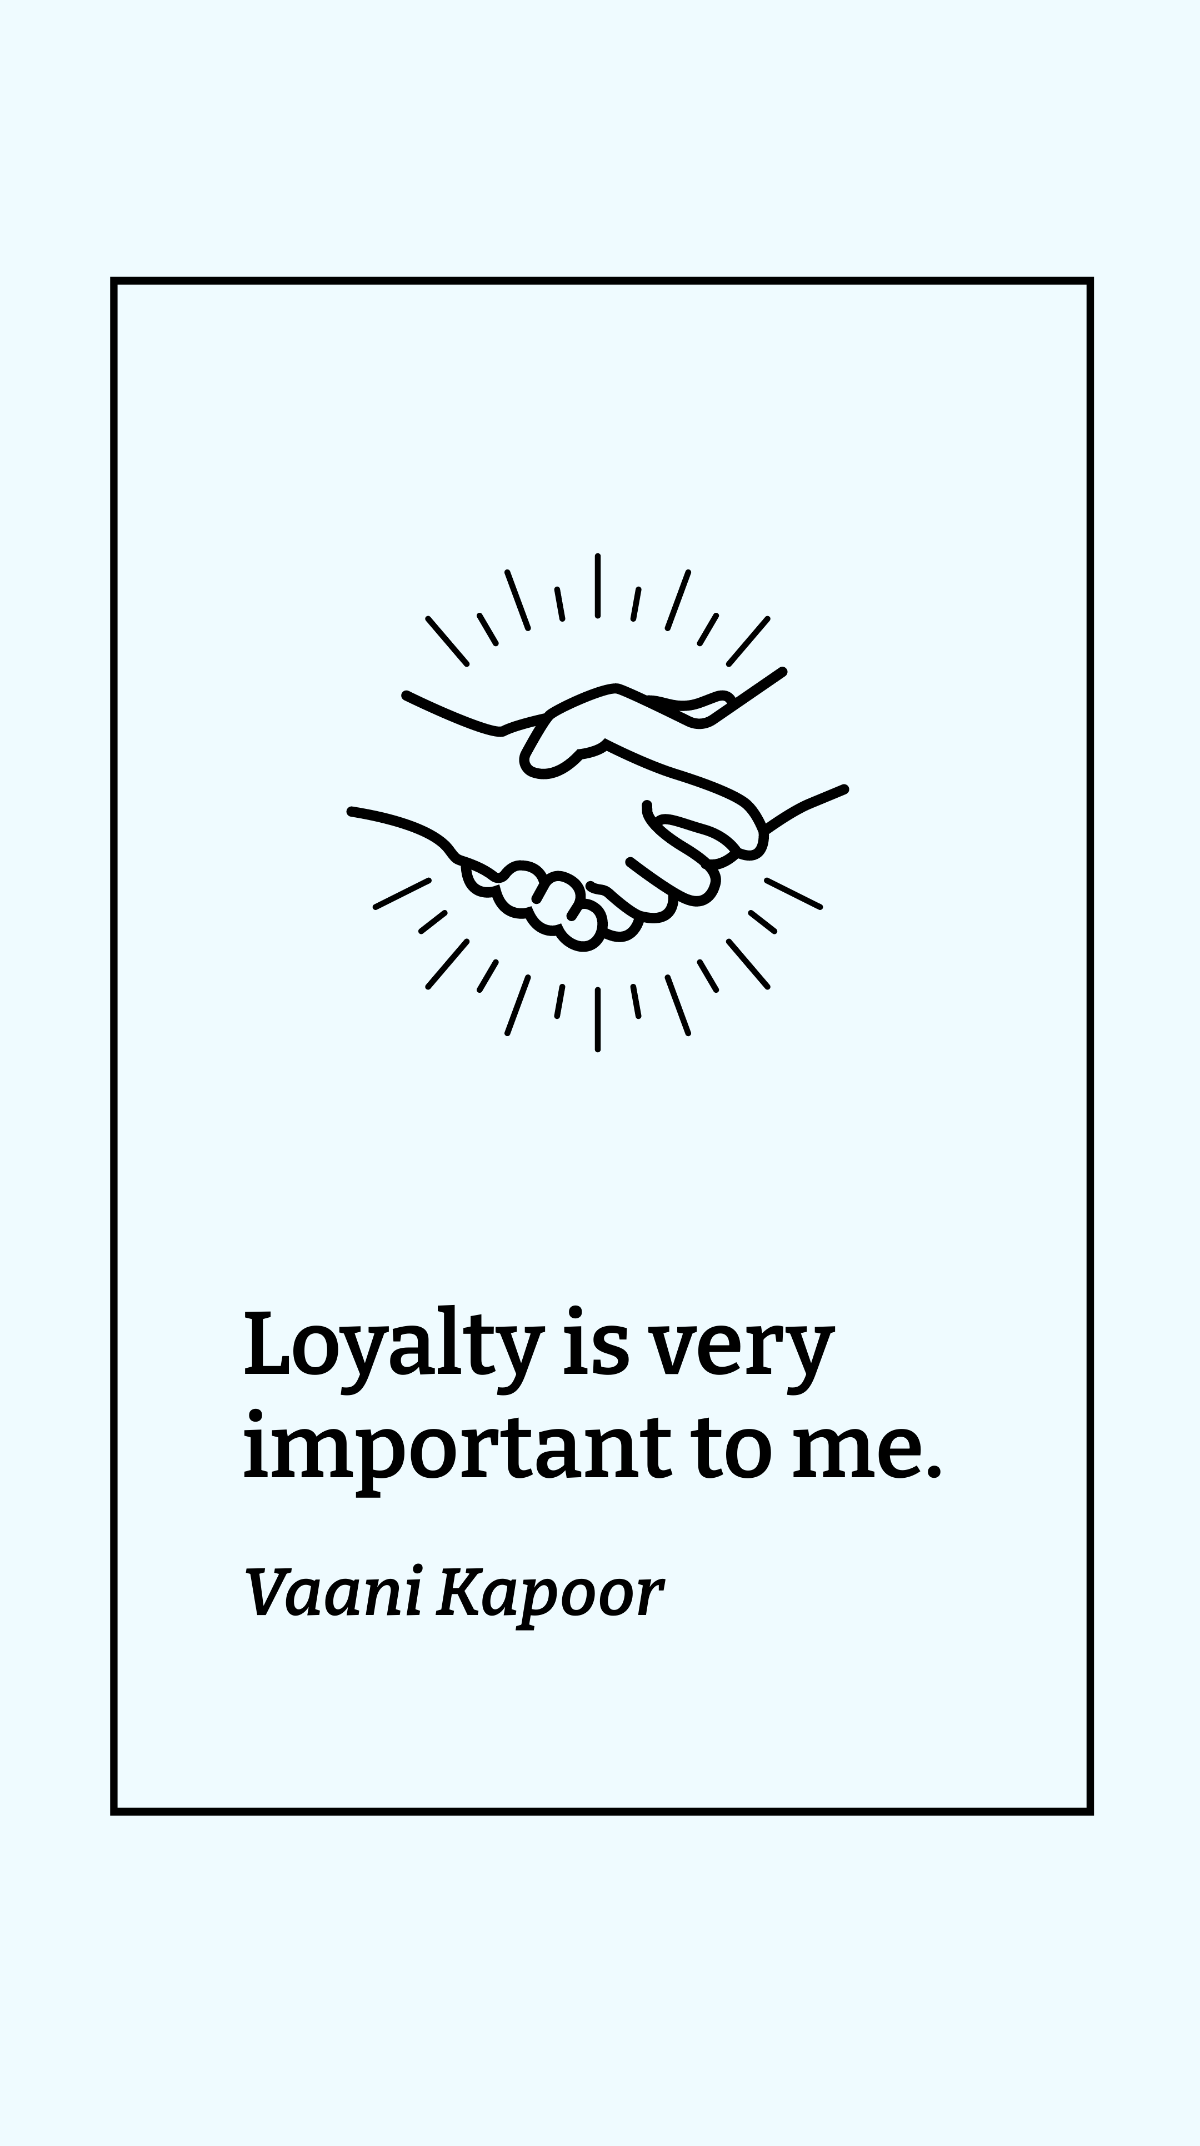 Vaani Kapoor - Loyalty is very important to me.